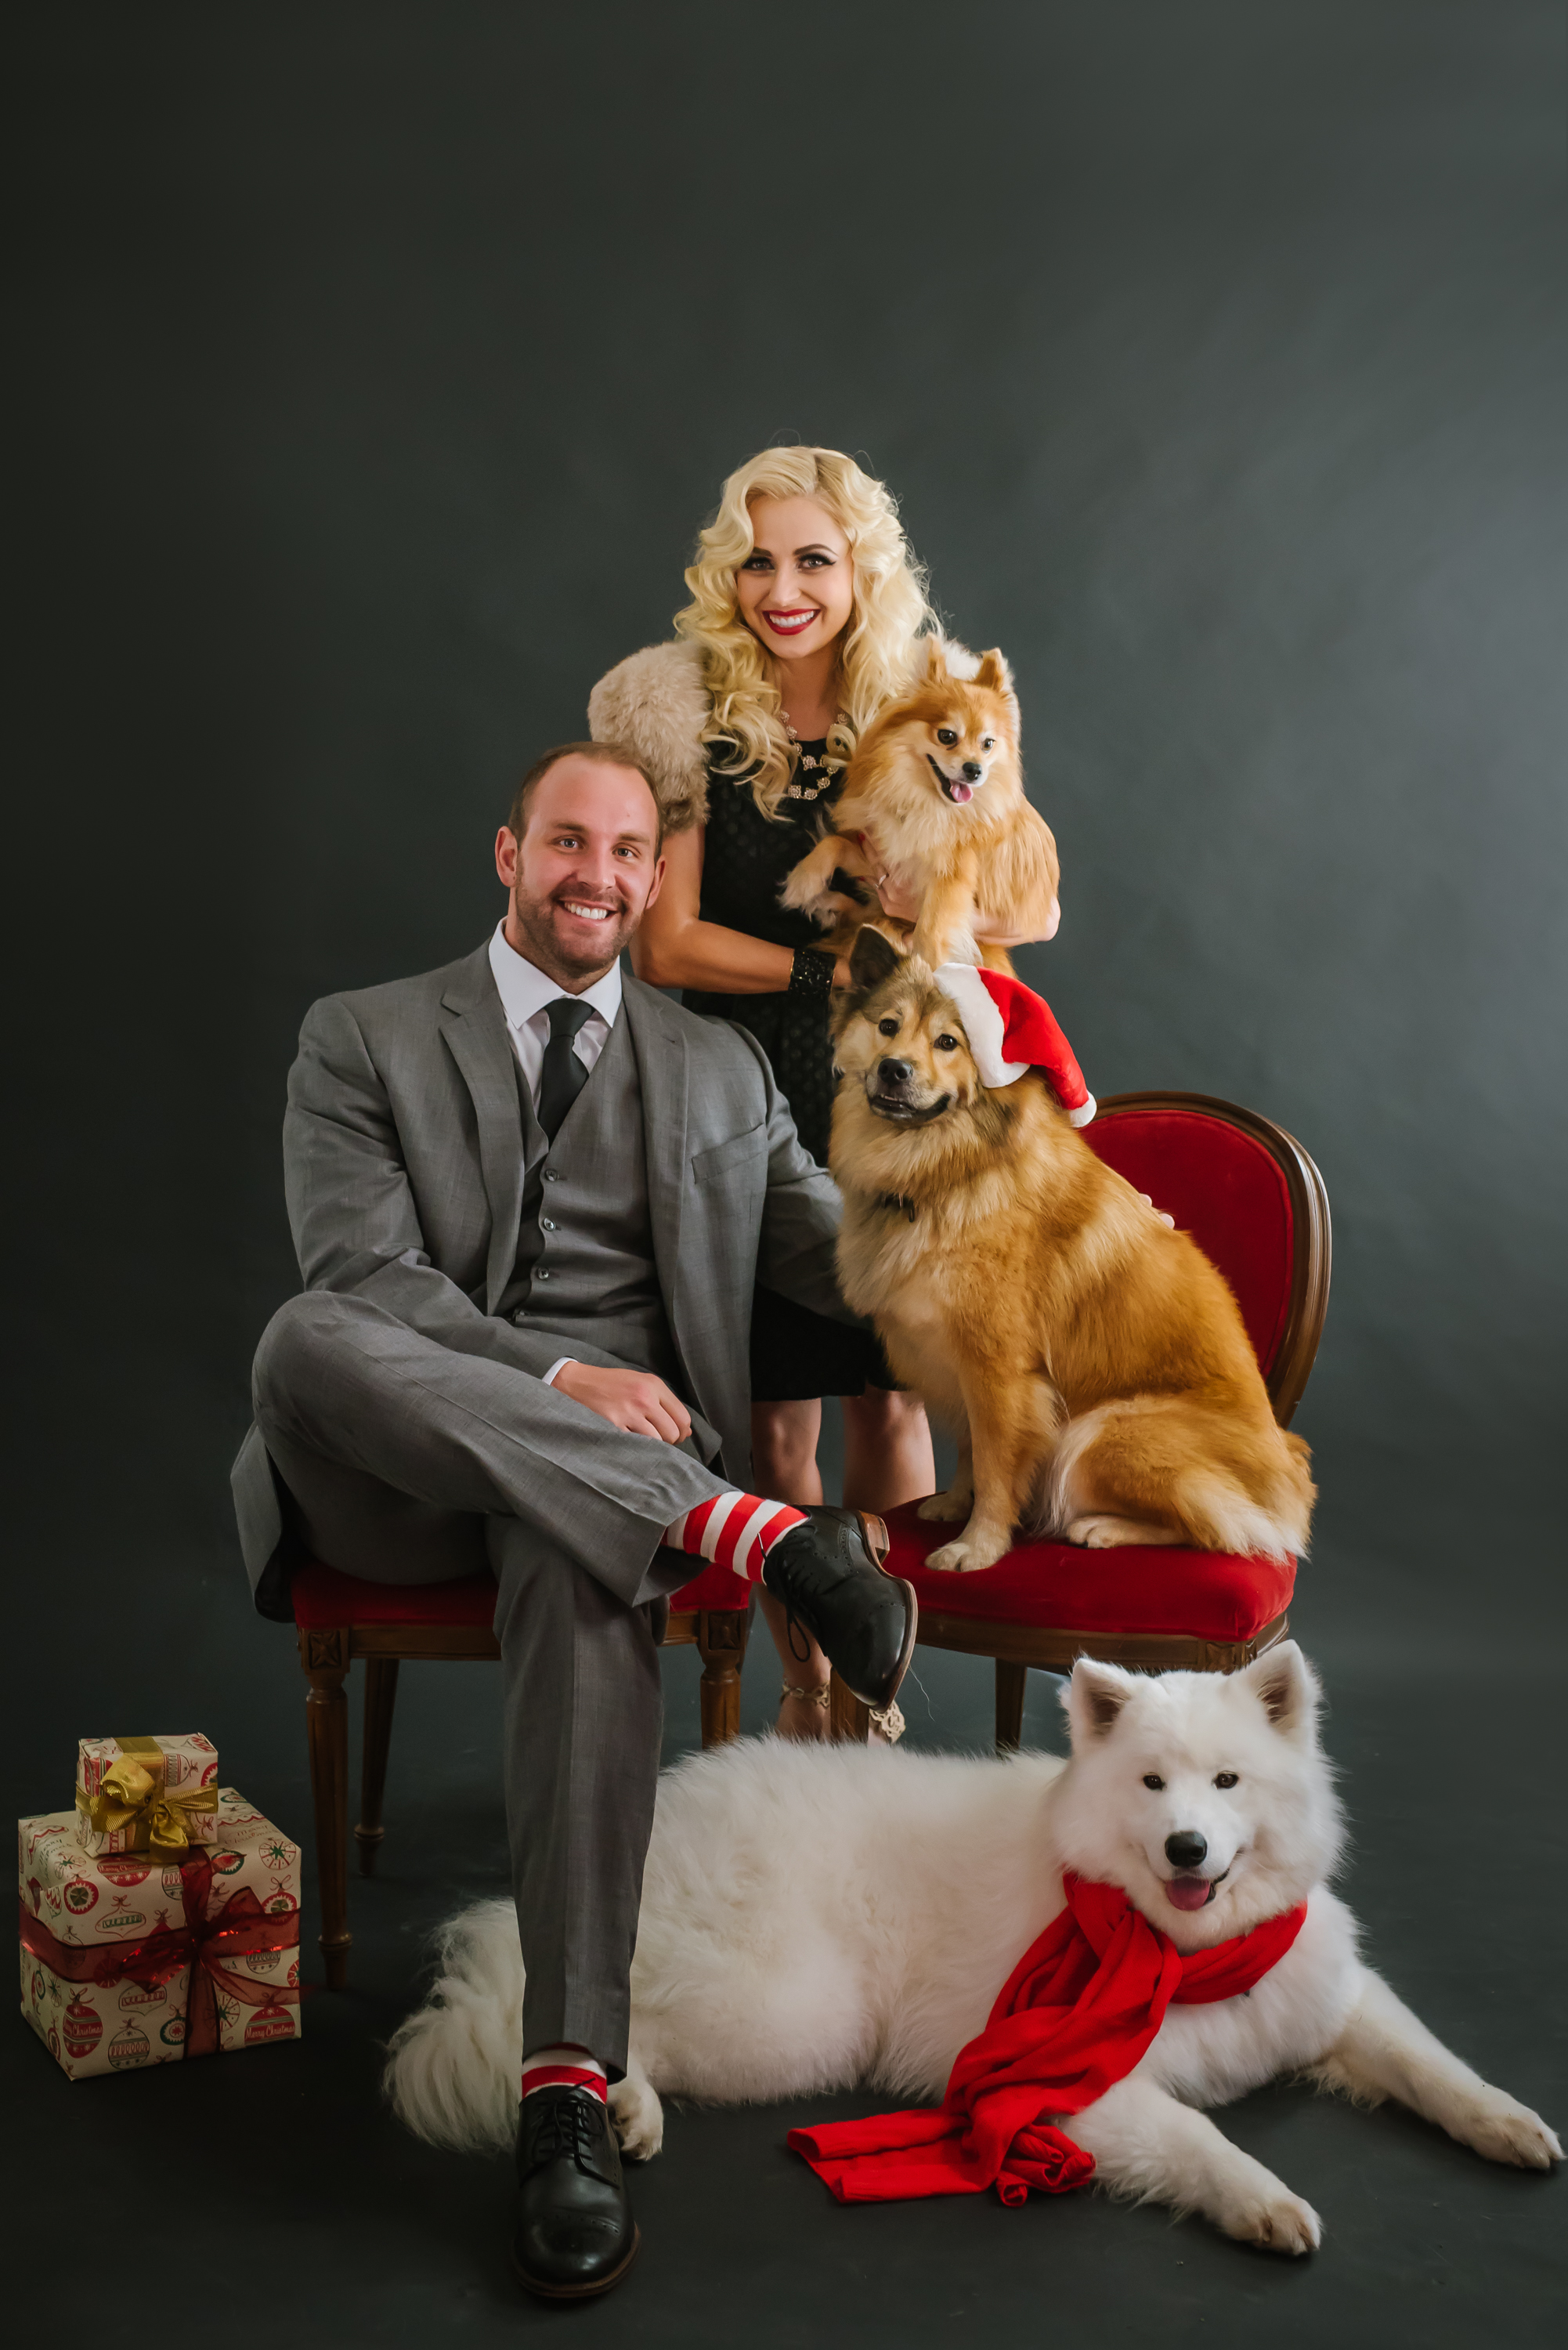 Then it was more pups at the studio for our holiday mini sessions!